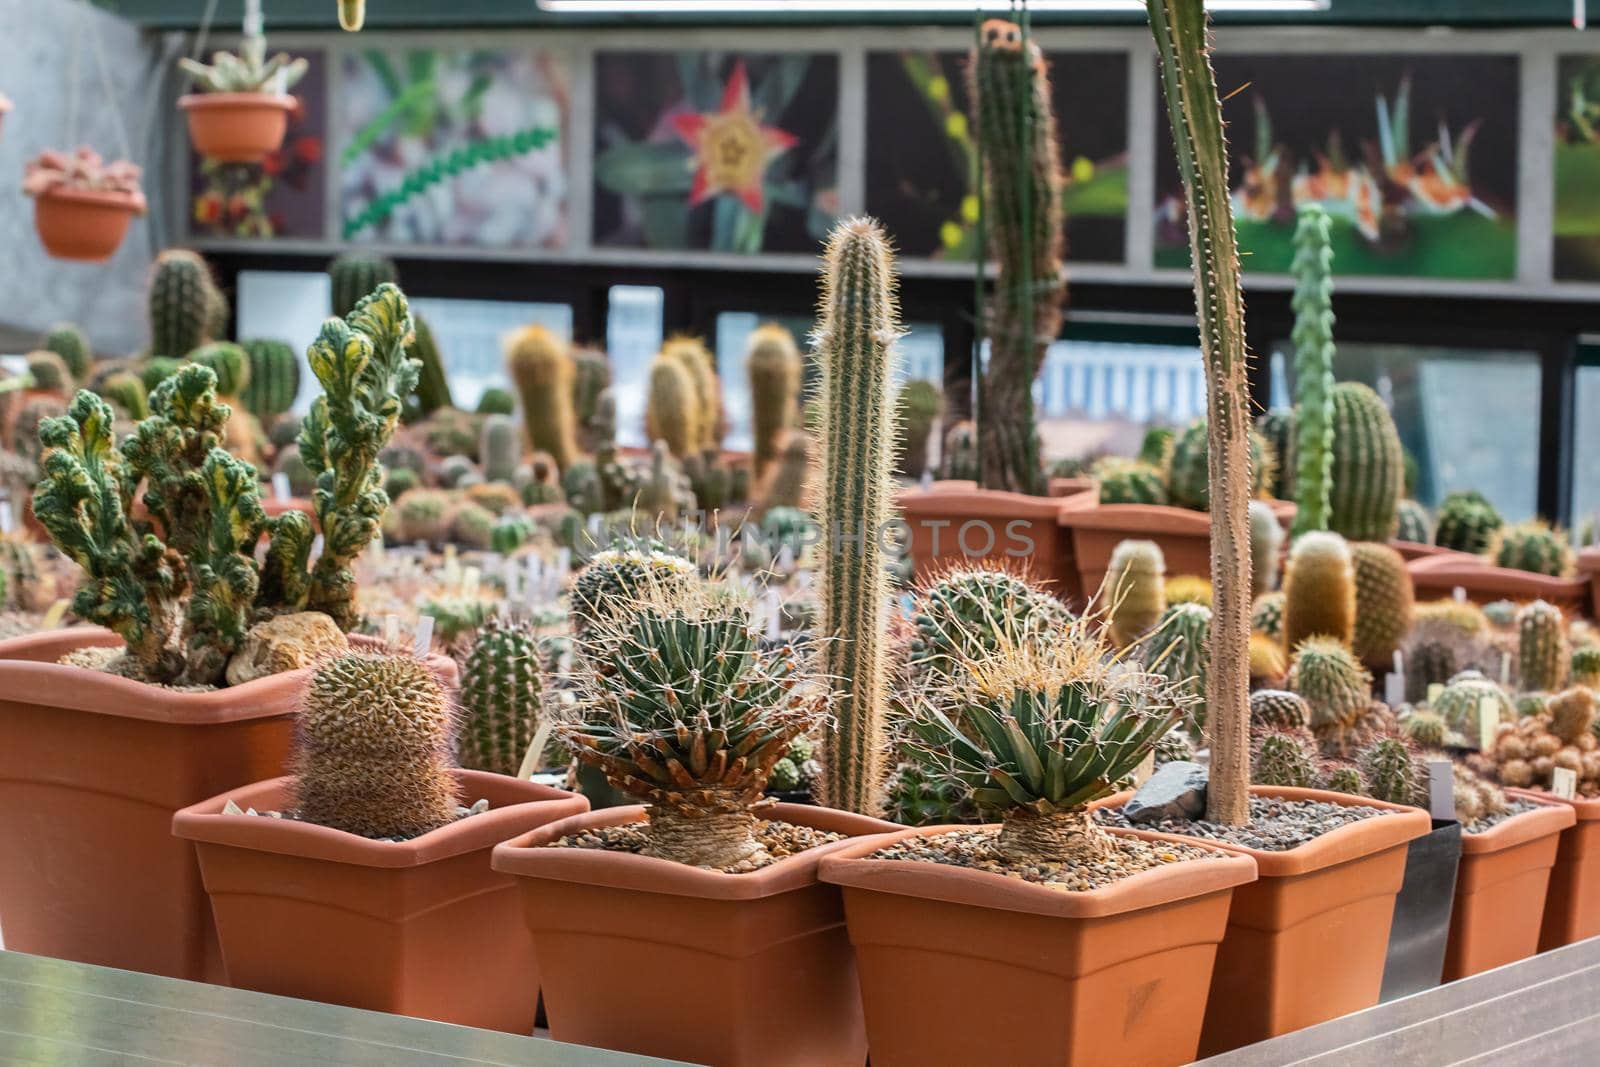 Collection of various tropical cactus and succulent plants in different pots. Potted cactus at the greenhouse garden